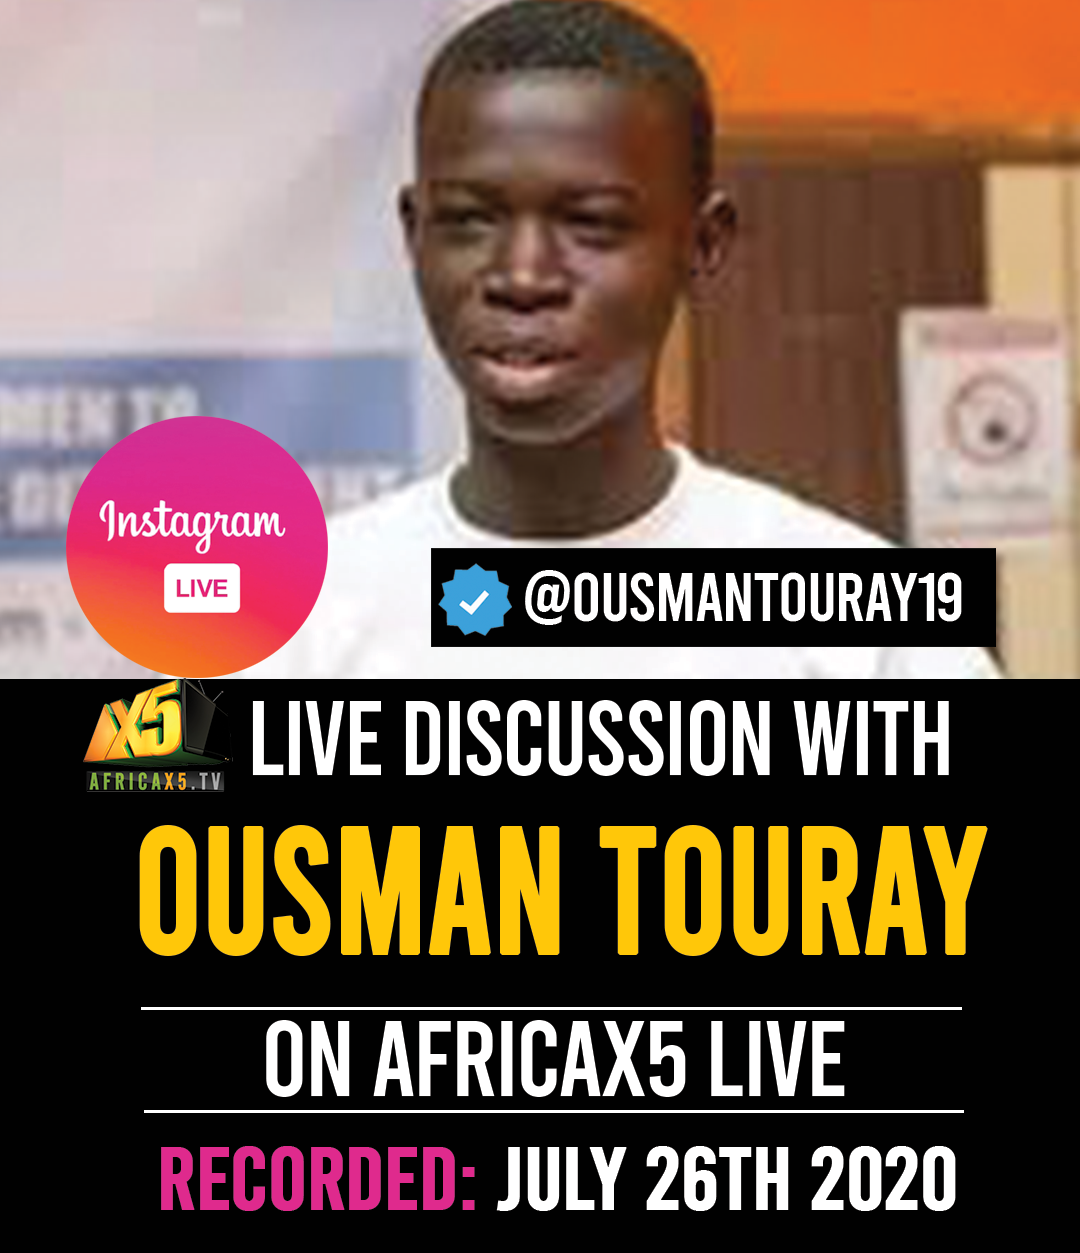 All things Africa- Live Discussion with Ousman Touray